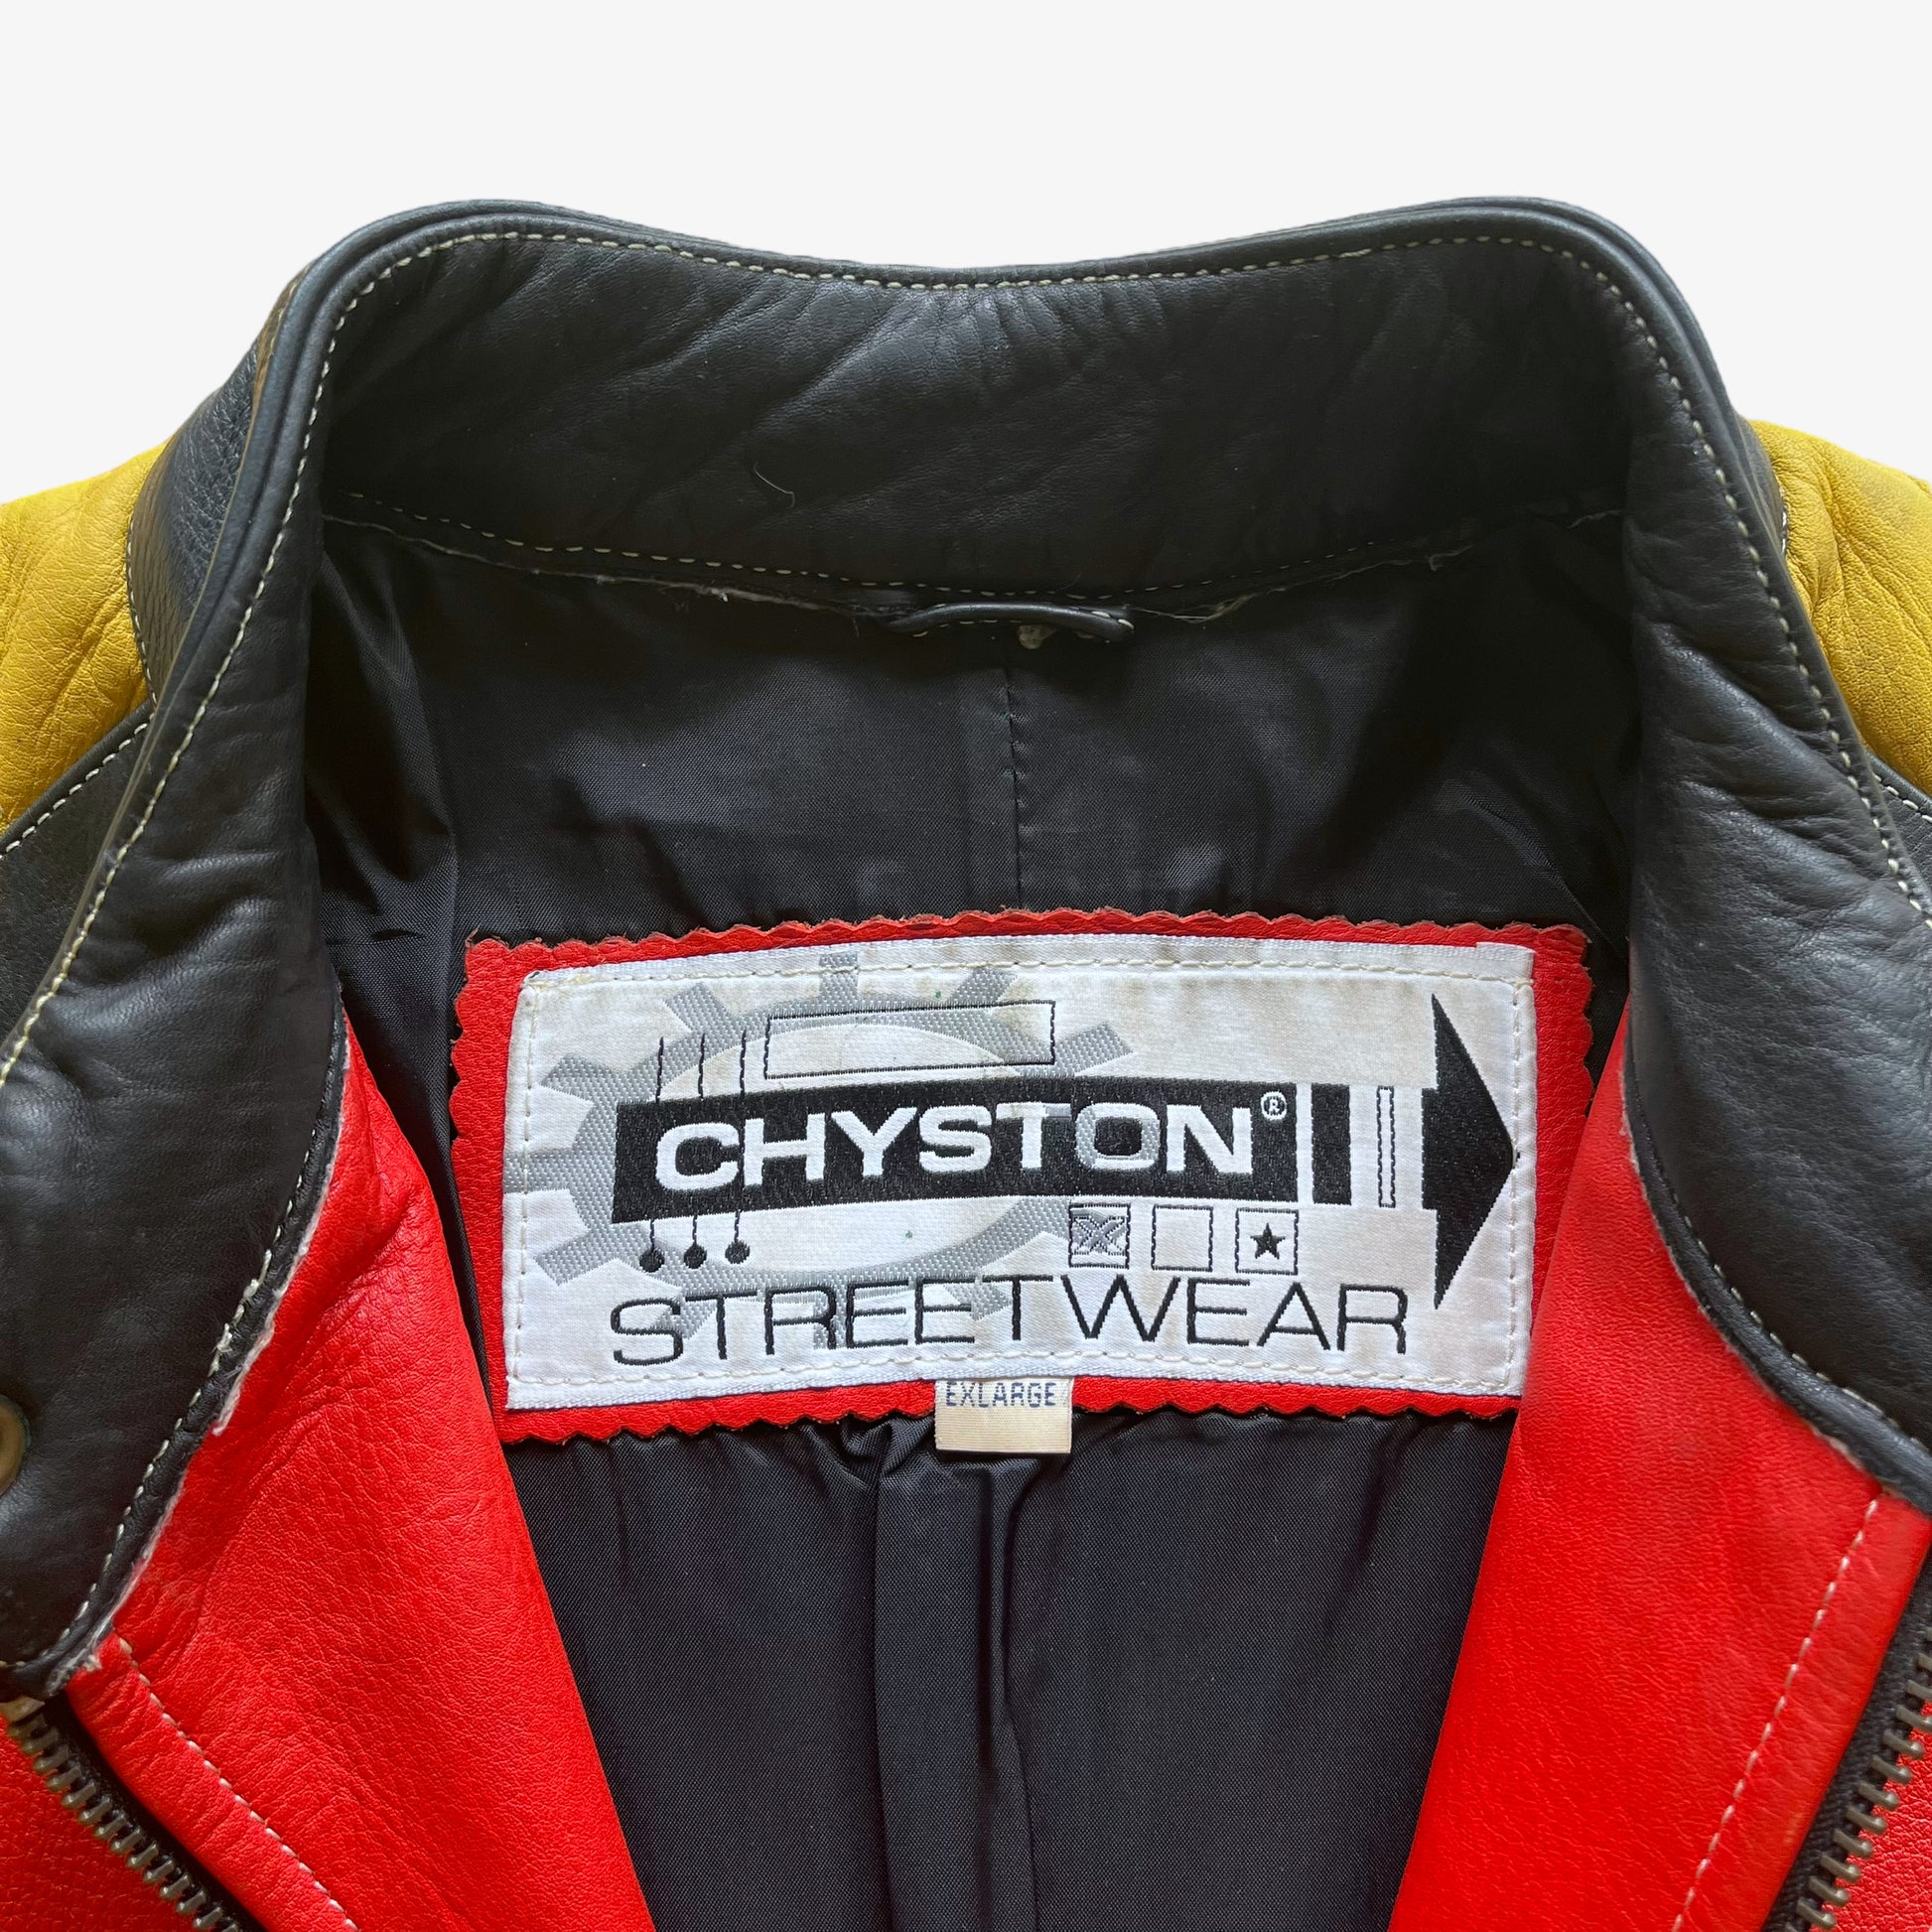 Vintage 1980s Chyston Red Leather Racing Jacket Label - Casspios Dream